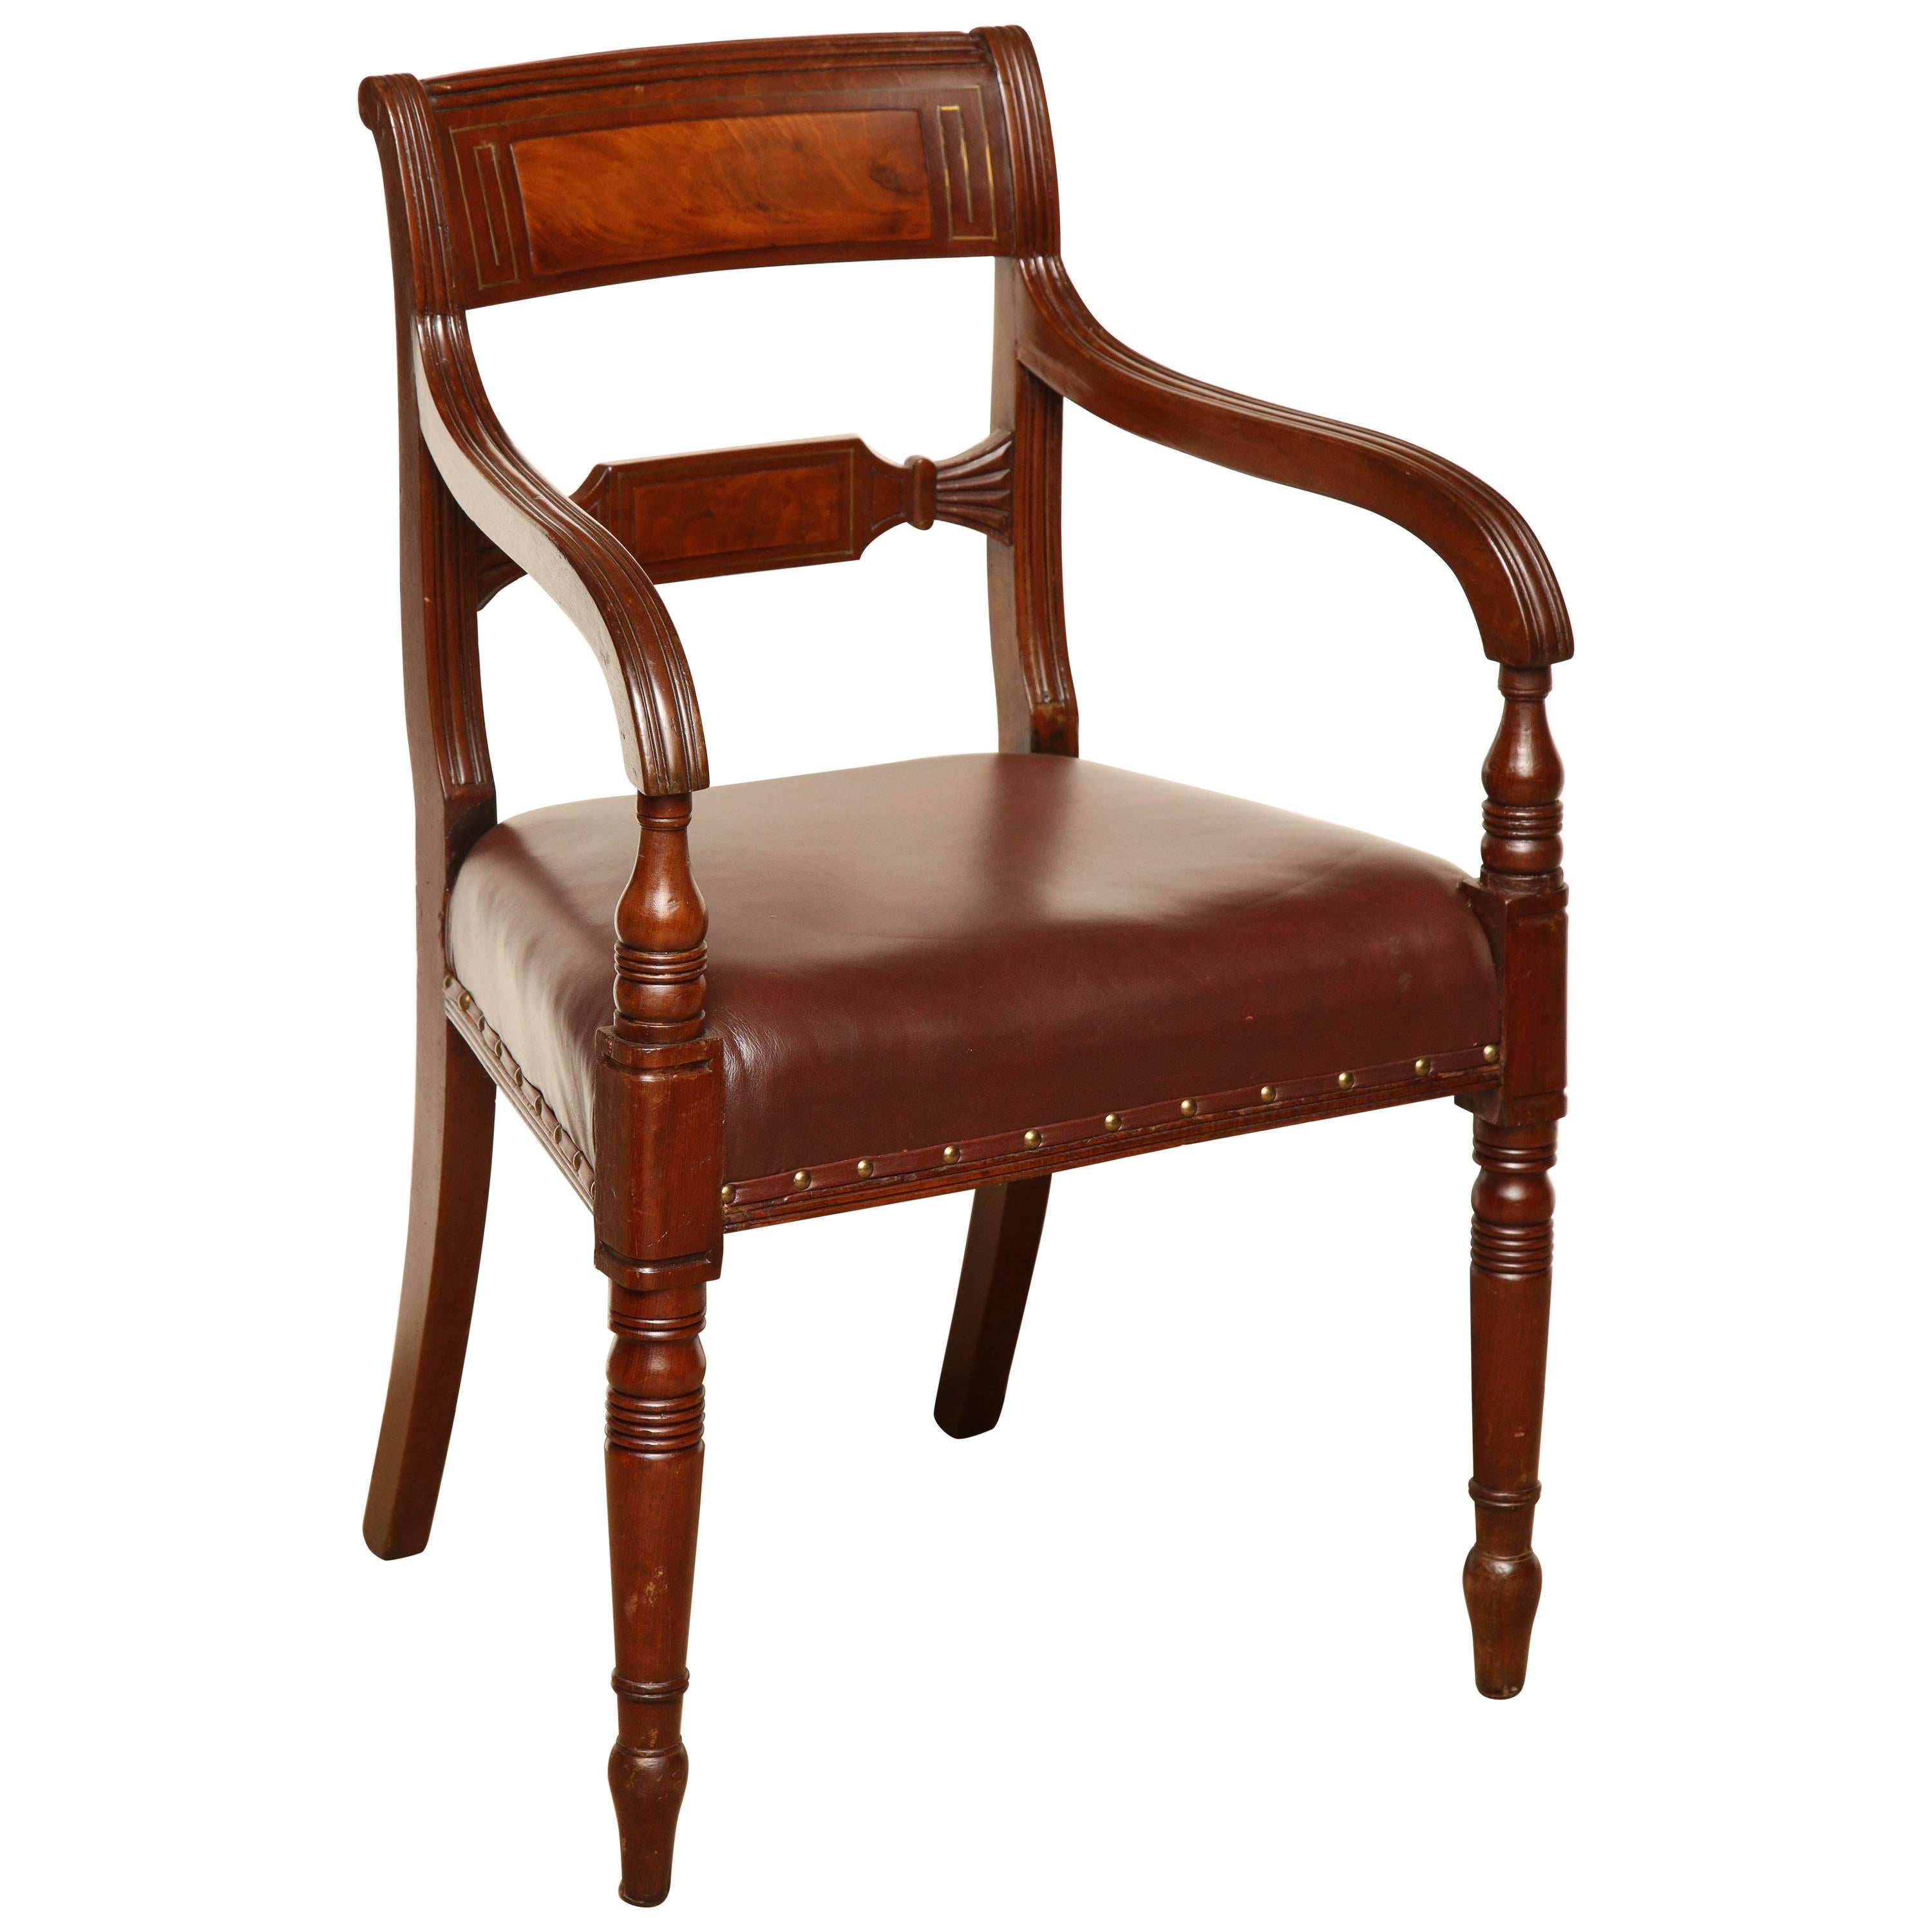 Early 19th Century English Regency, Mahogany and Brass Inlay Desk Chair For Sale